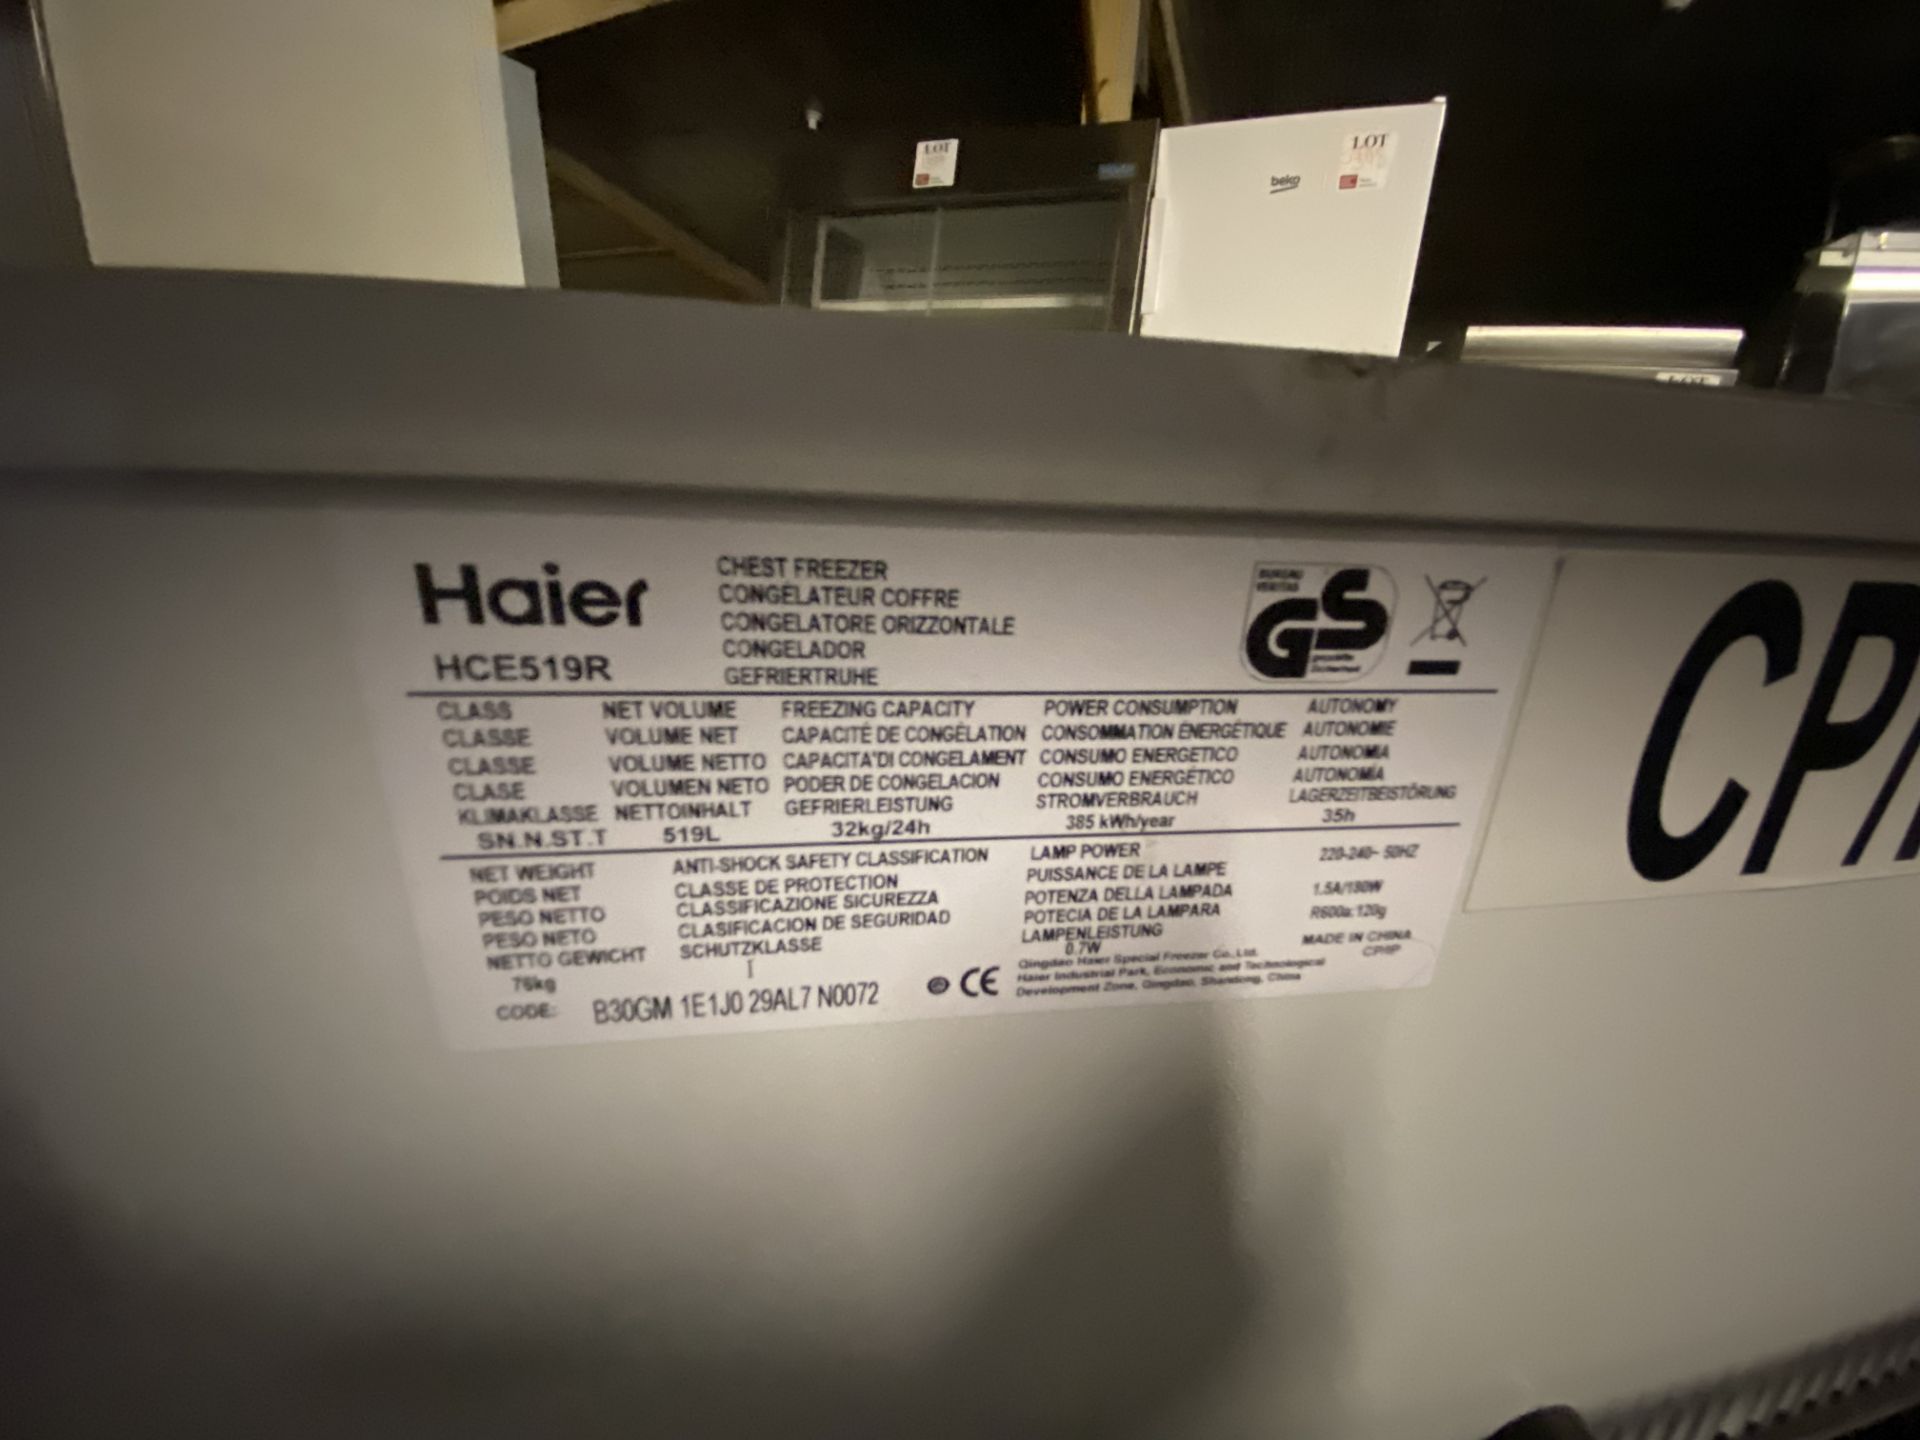 Hier chest freezer, model HCE519R - Image 3 of 6